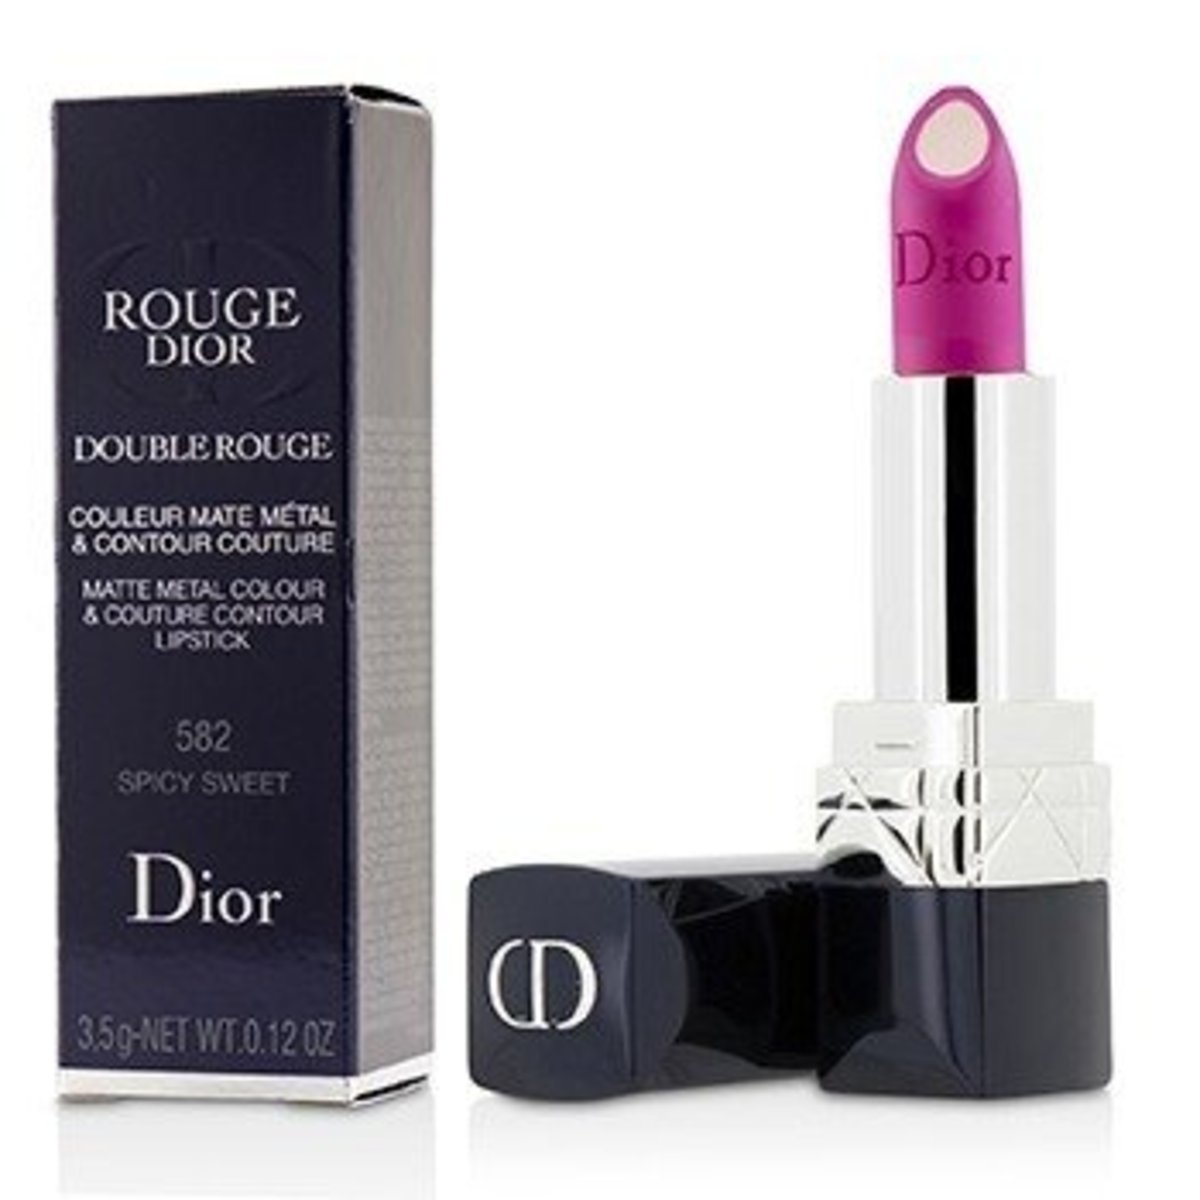 Rouge Dior Double Rouge Matte Metal 